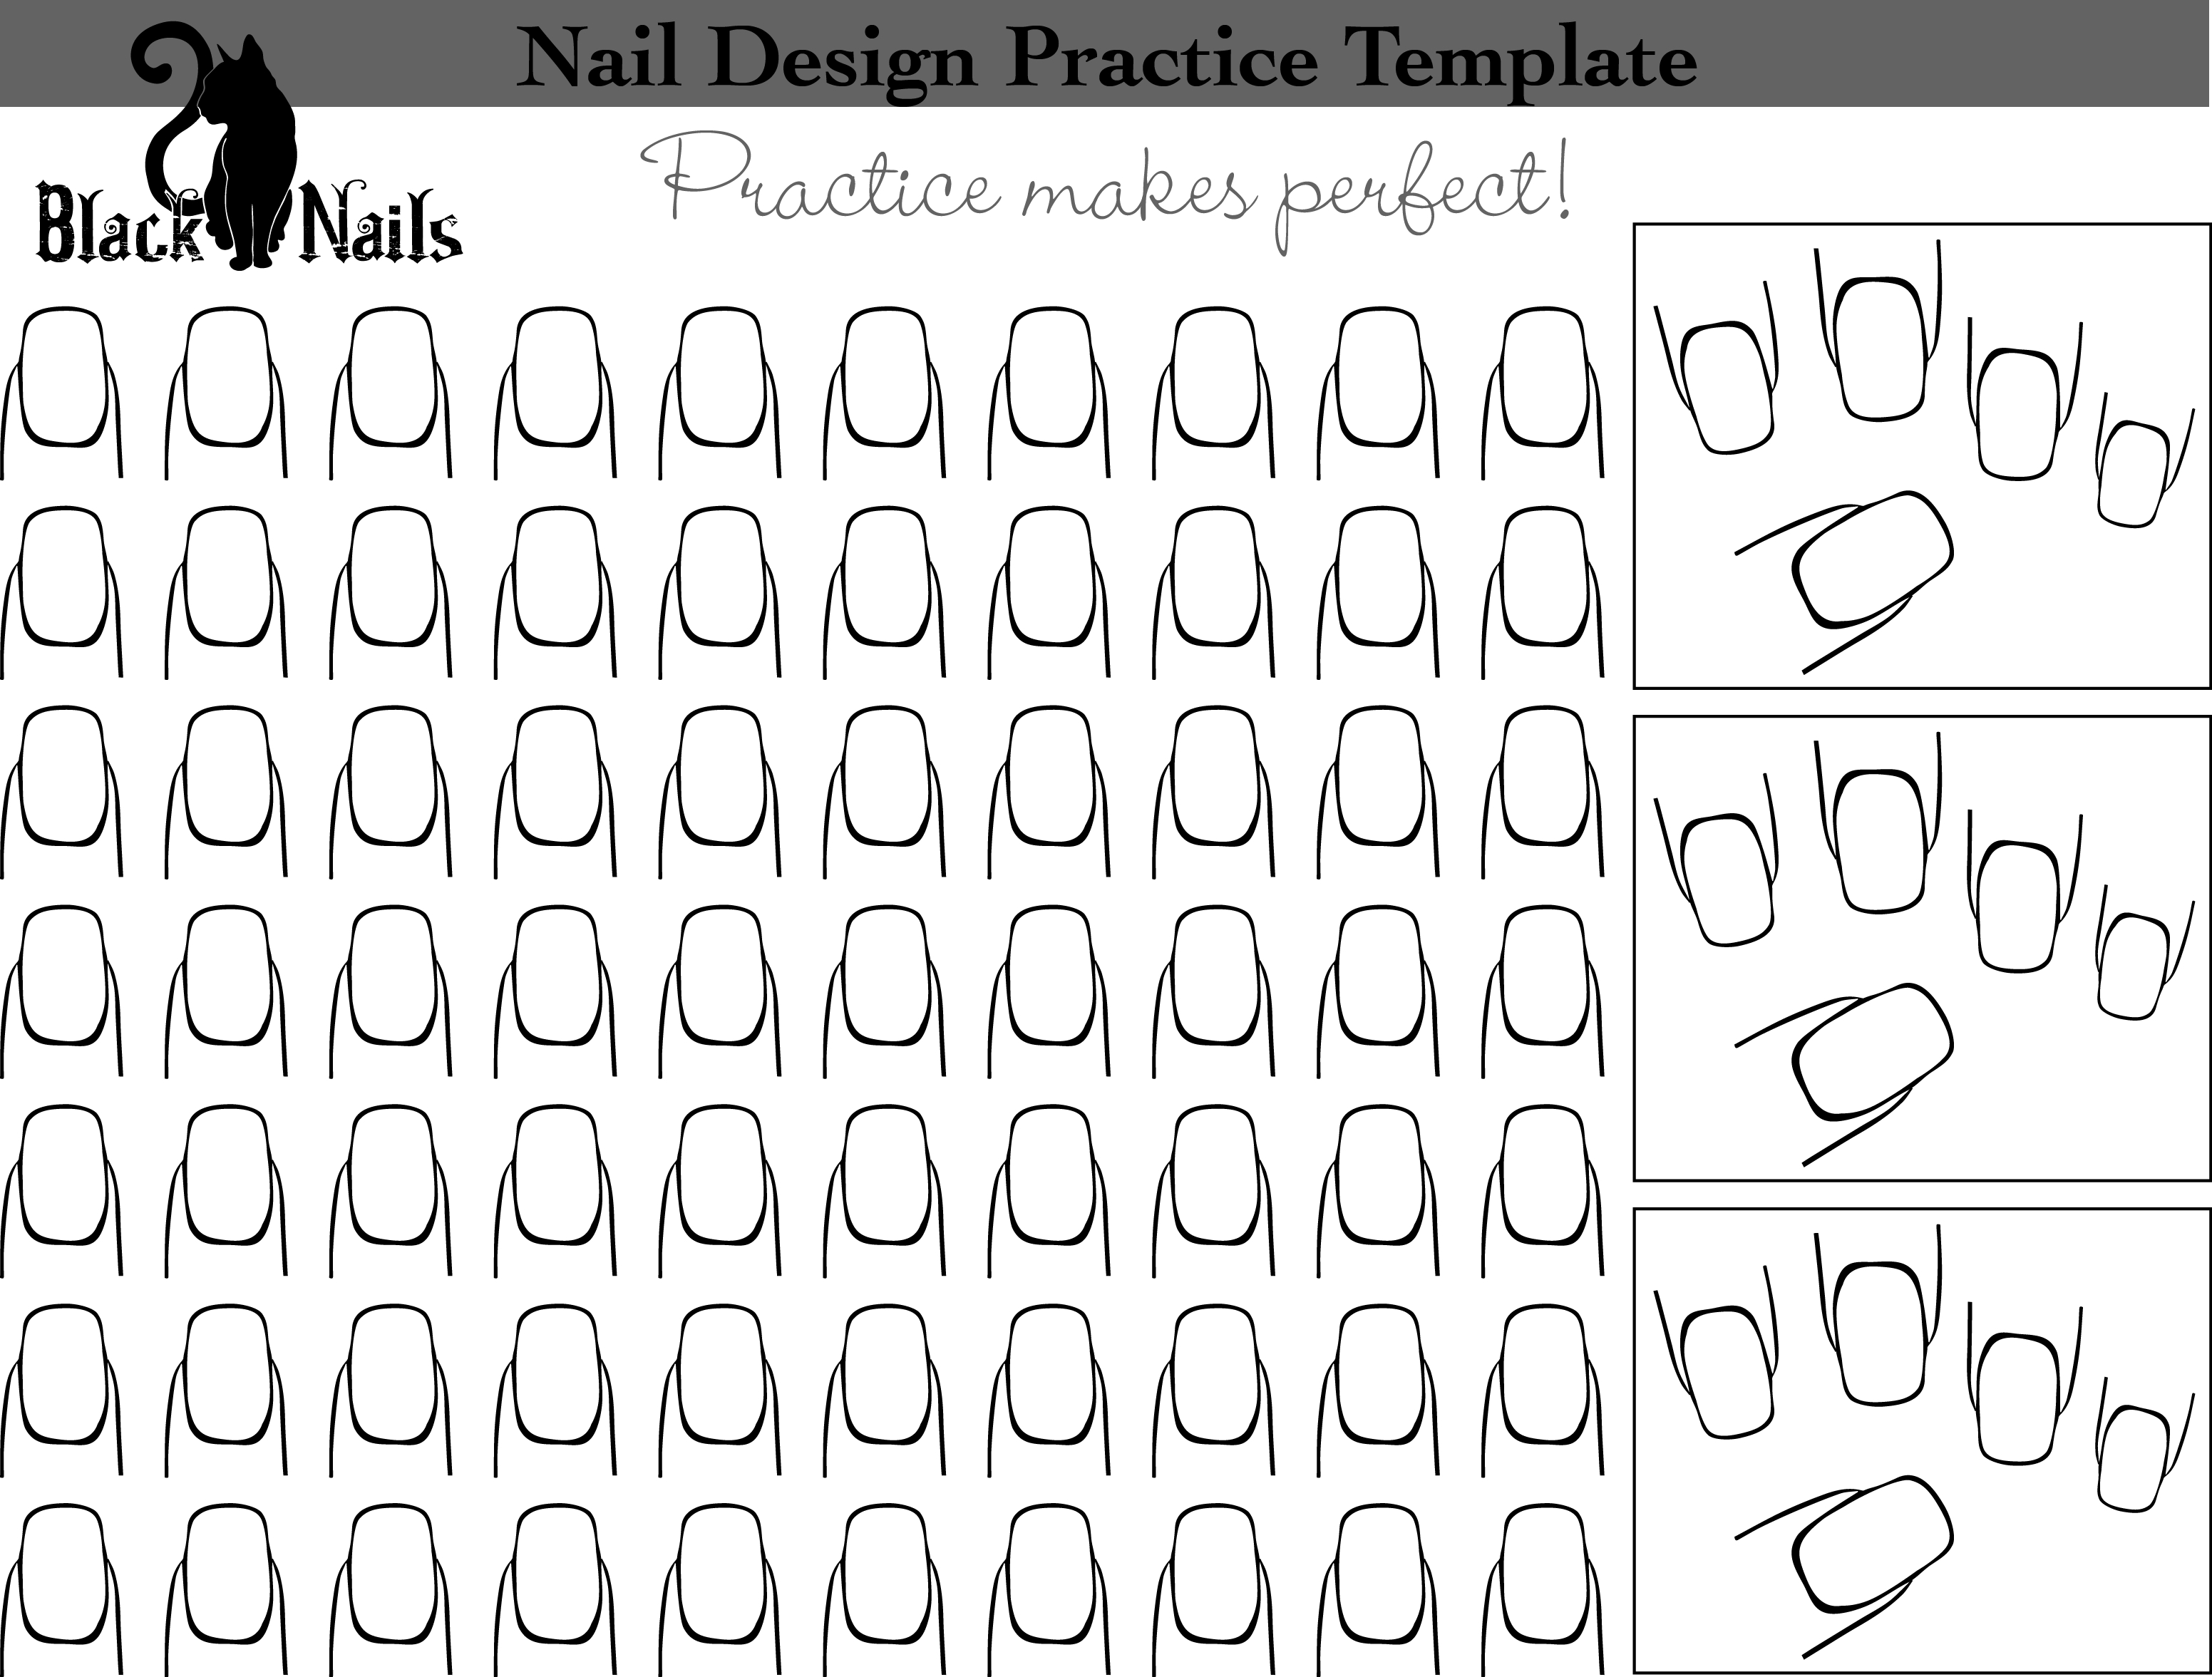 1. Tribal Print Nail Art Designs for Summer - wide 7